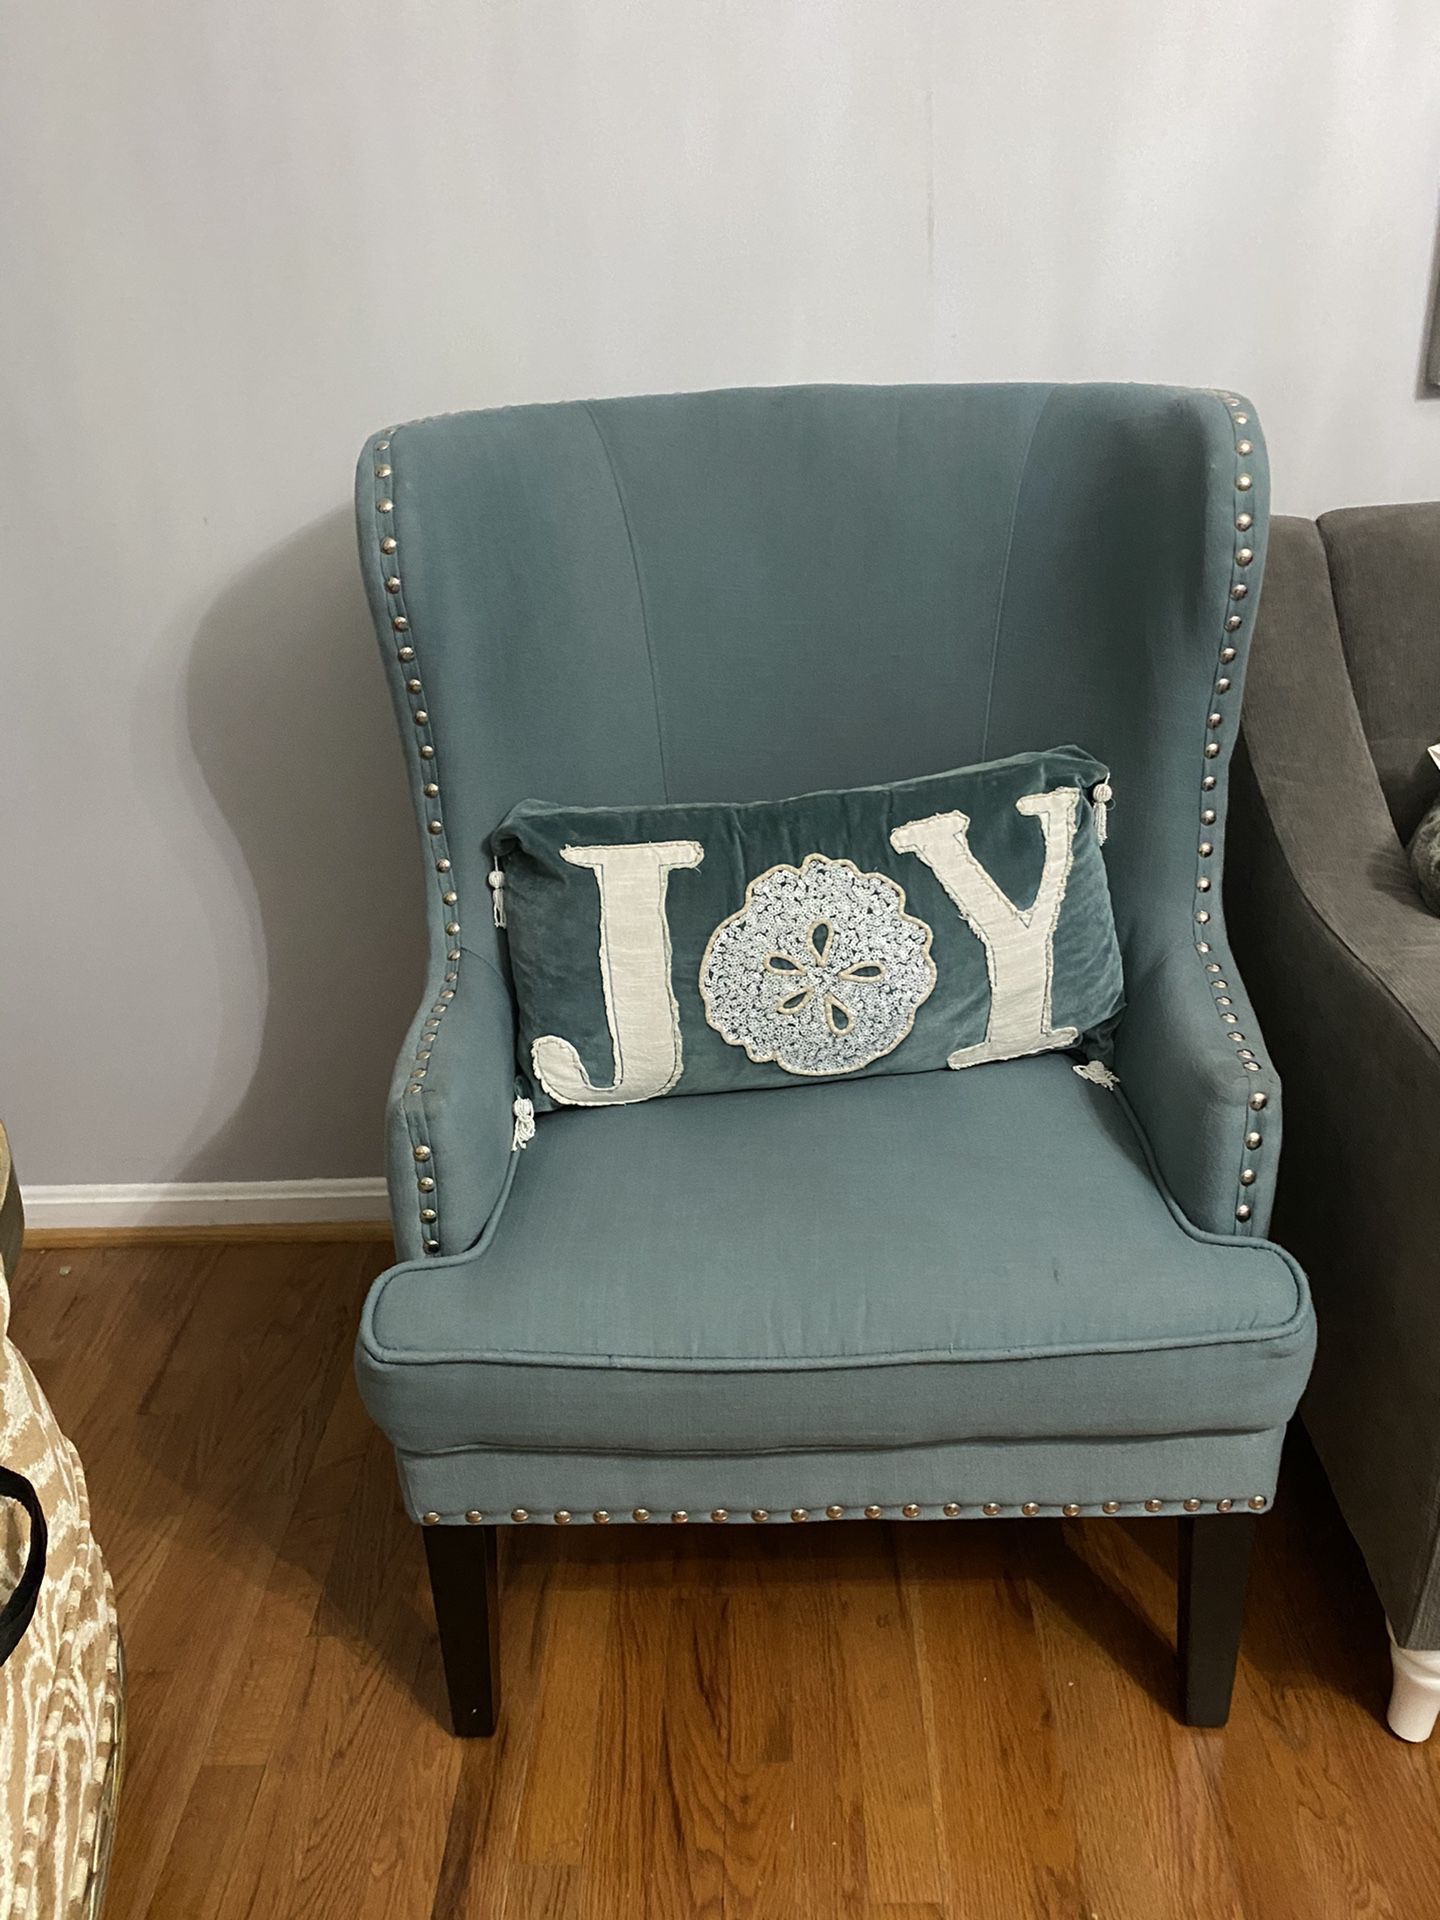 Chair and loveseat